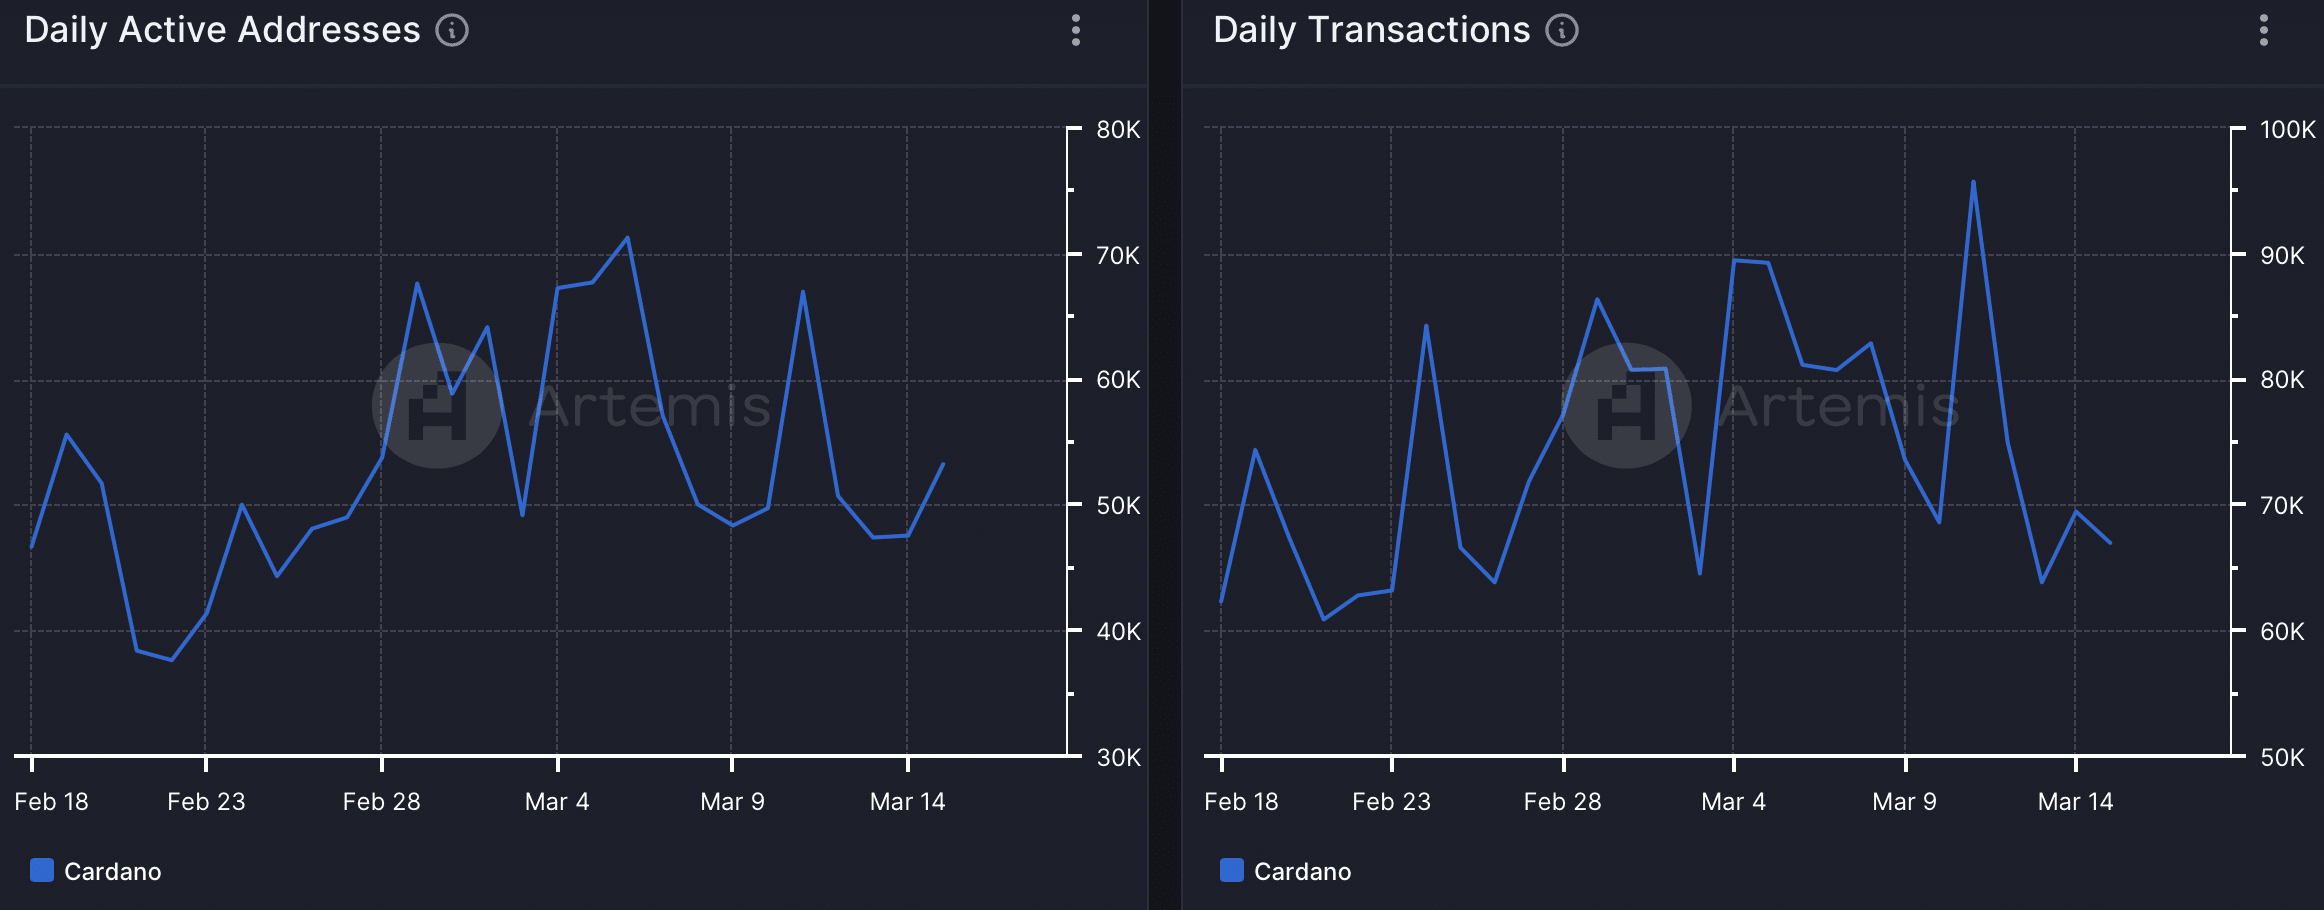 Cardano's network activity is rising 